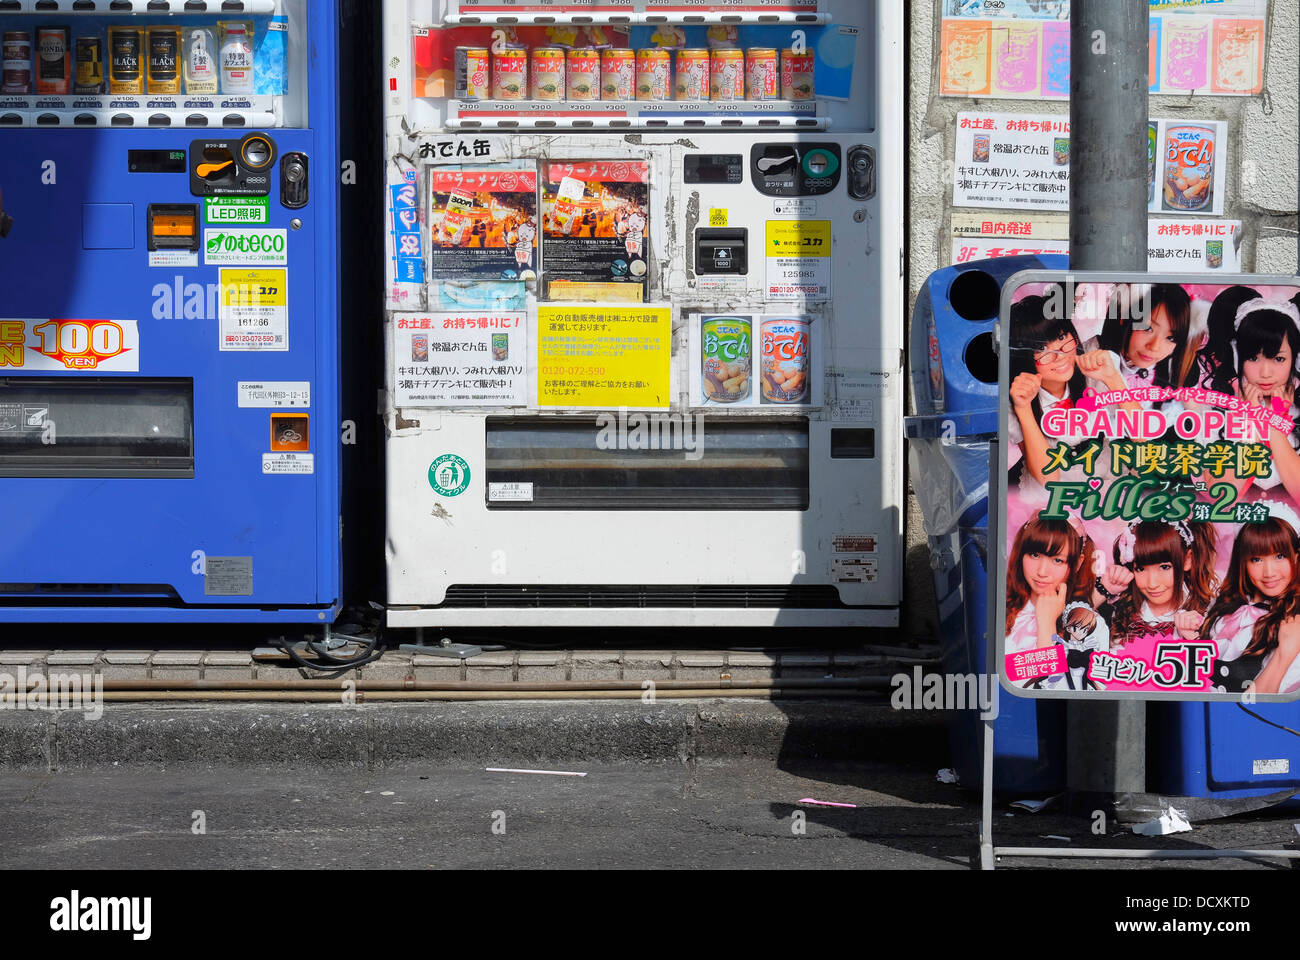 Vending machines and Maid cafe sign in Akihabara Stock Photo